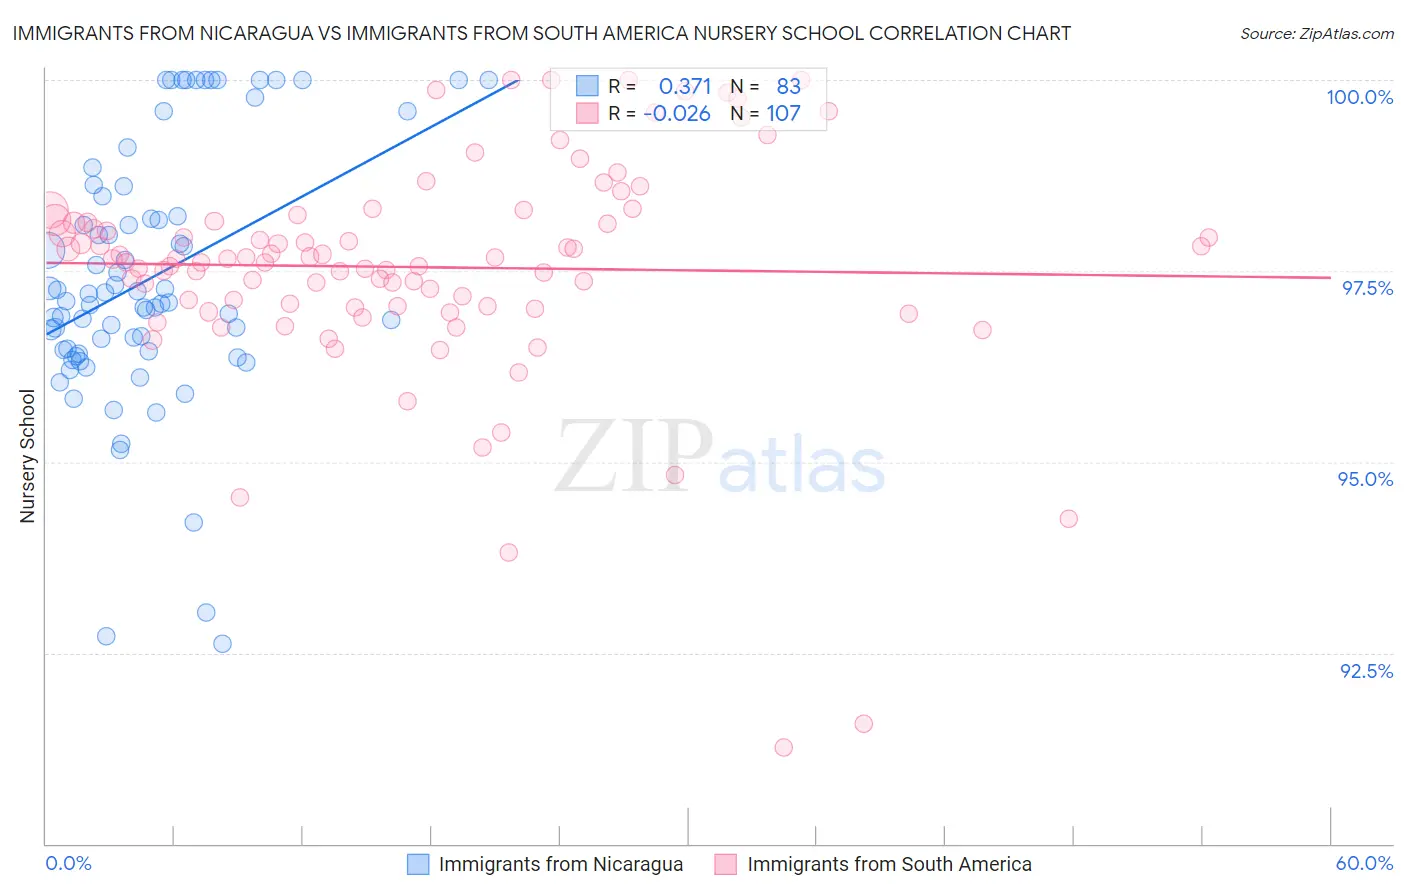 Immigrants from Nicaragua vs Immigrants from South America Nursery School